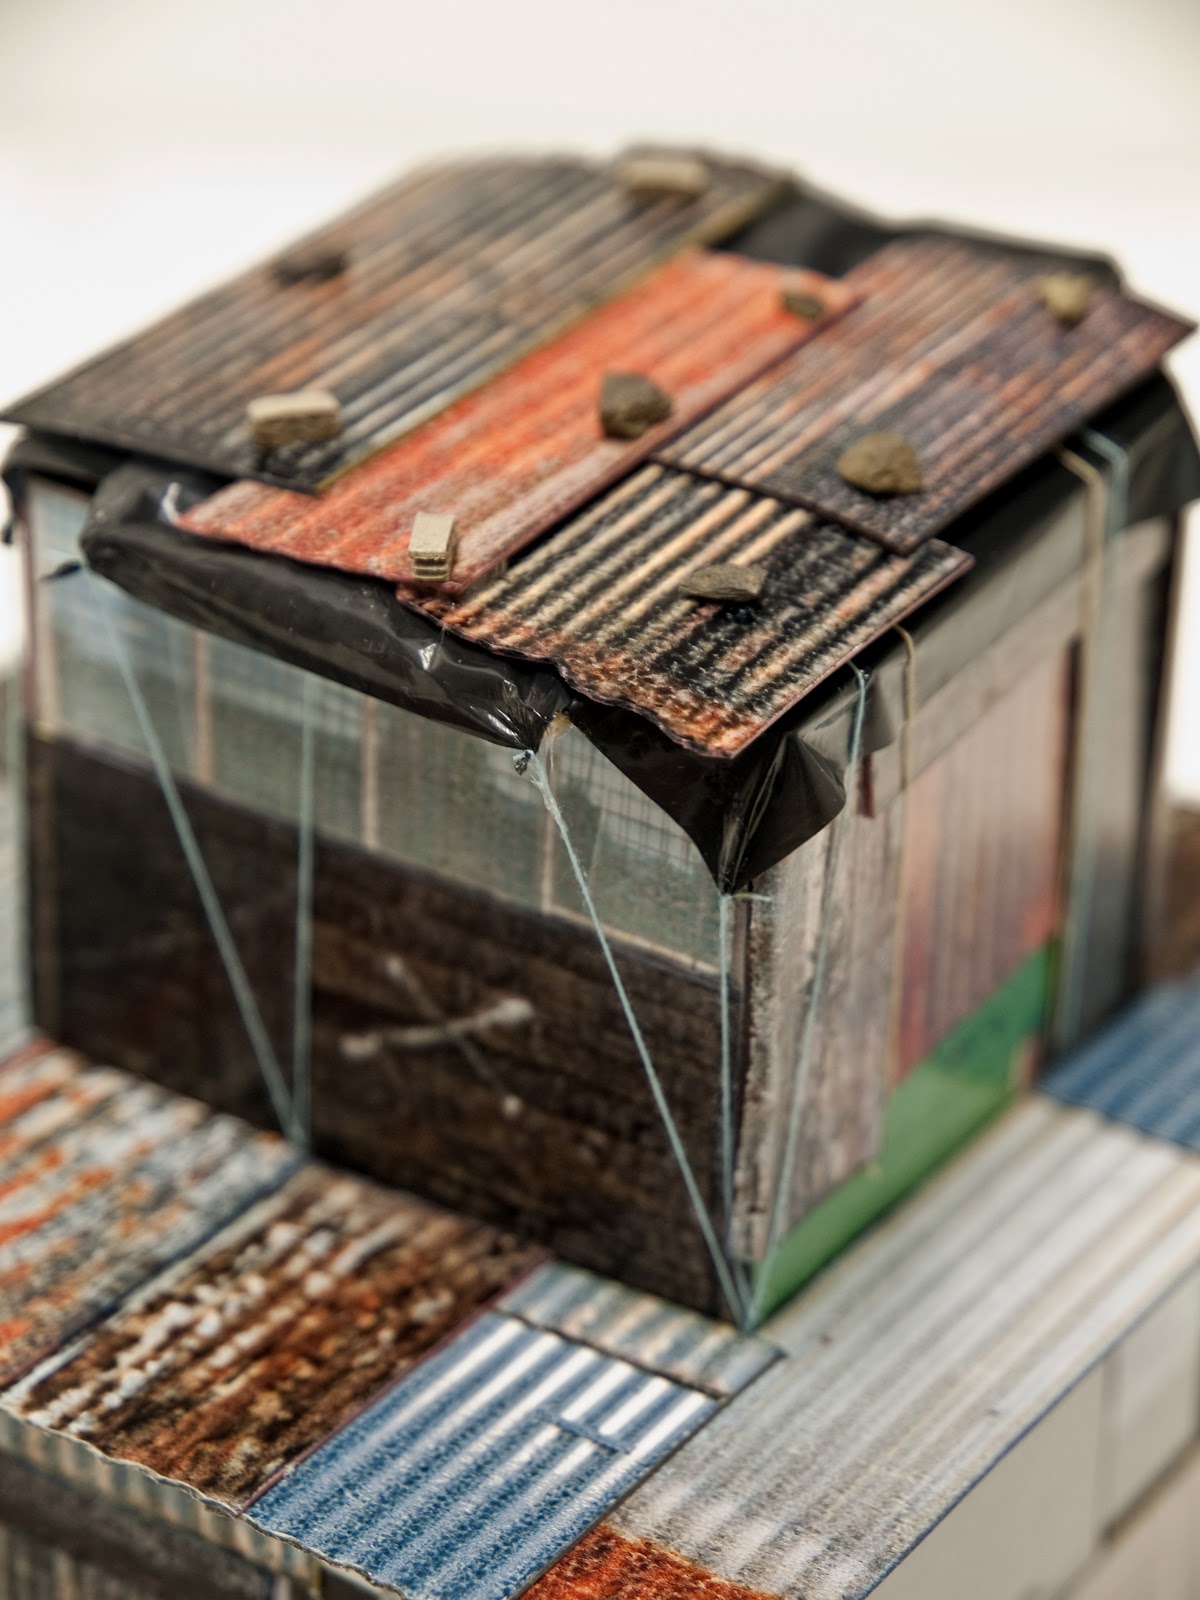 Small Houses Ceramics. Small Scale. Justice Miniature photos.